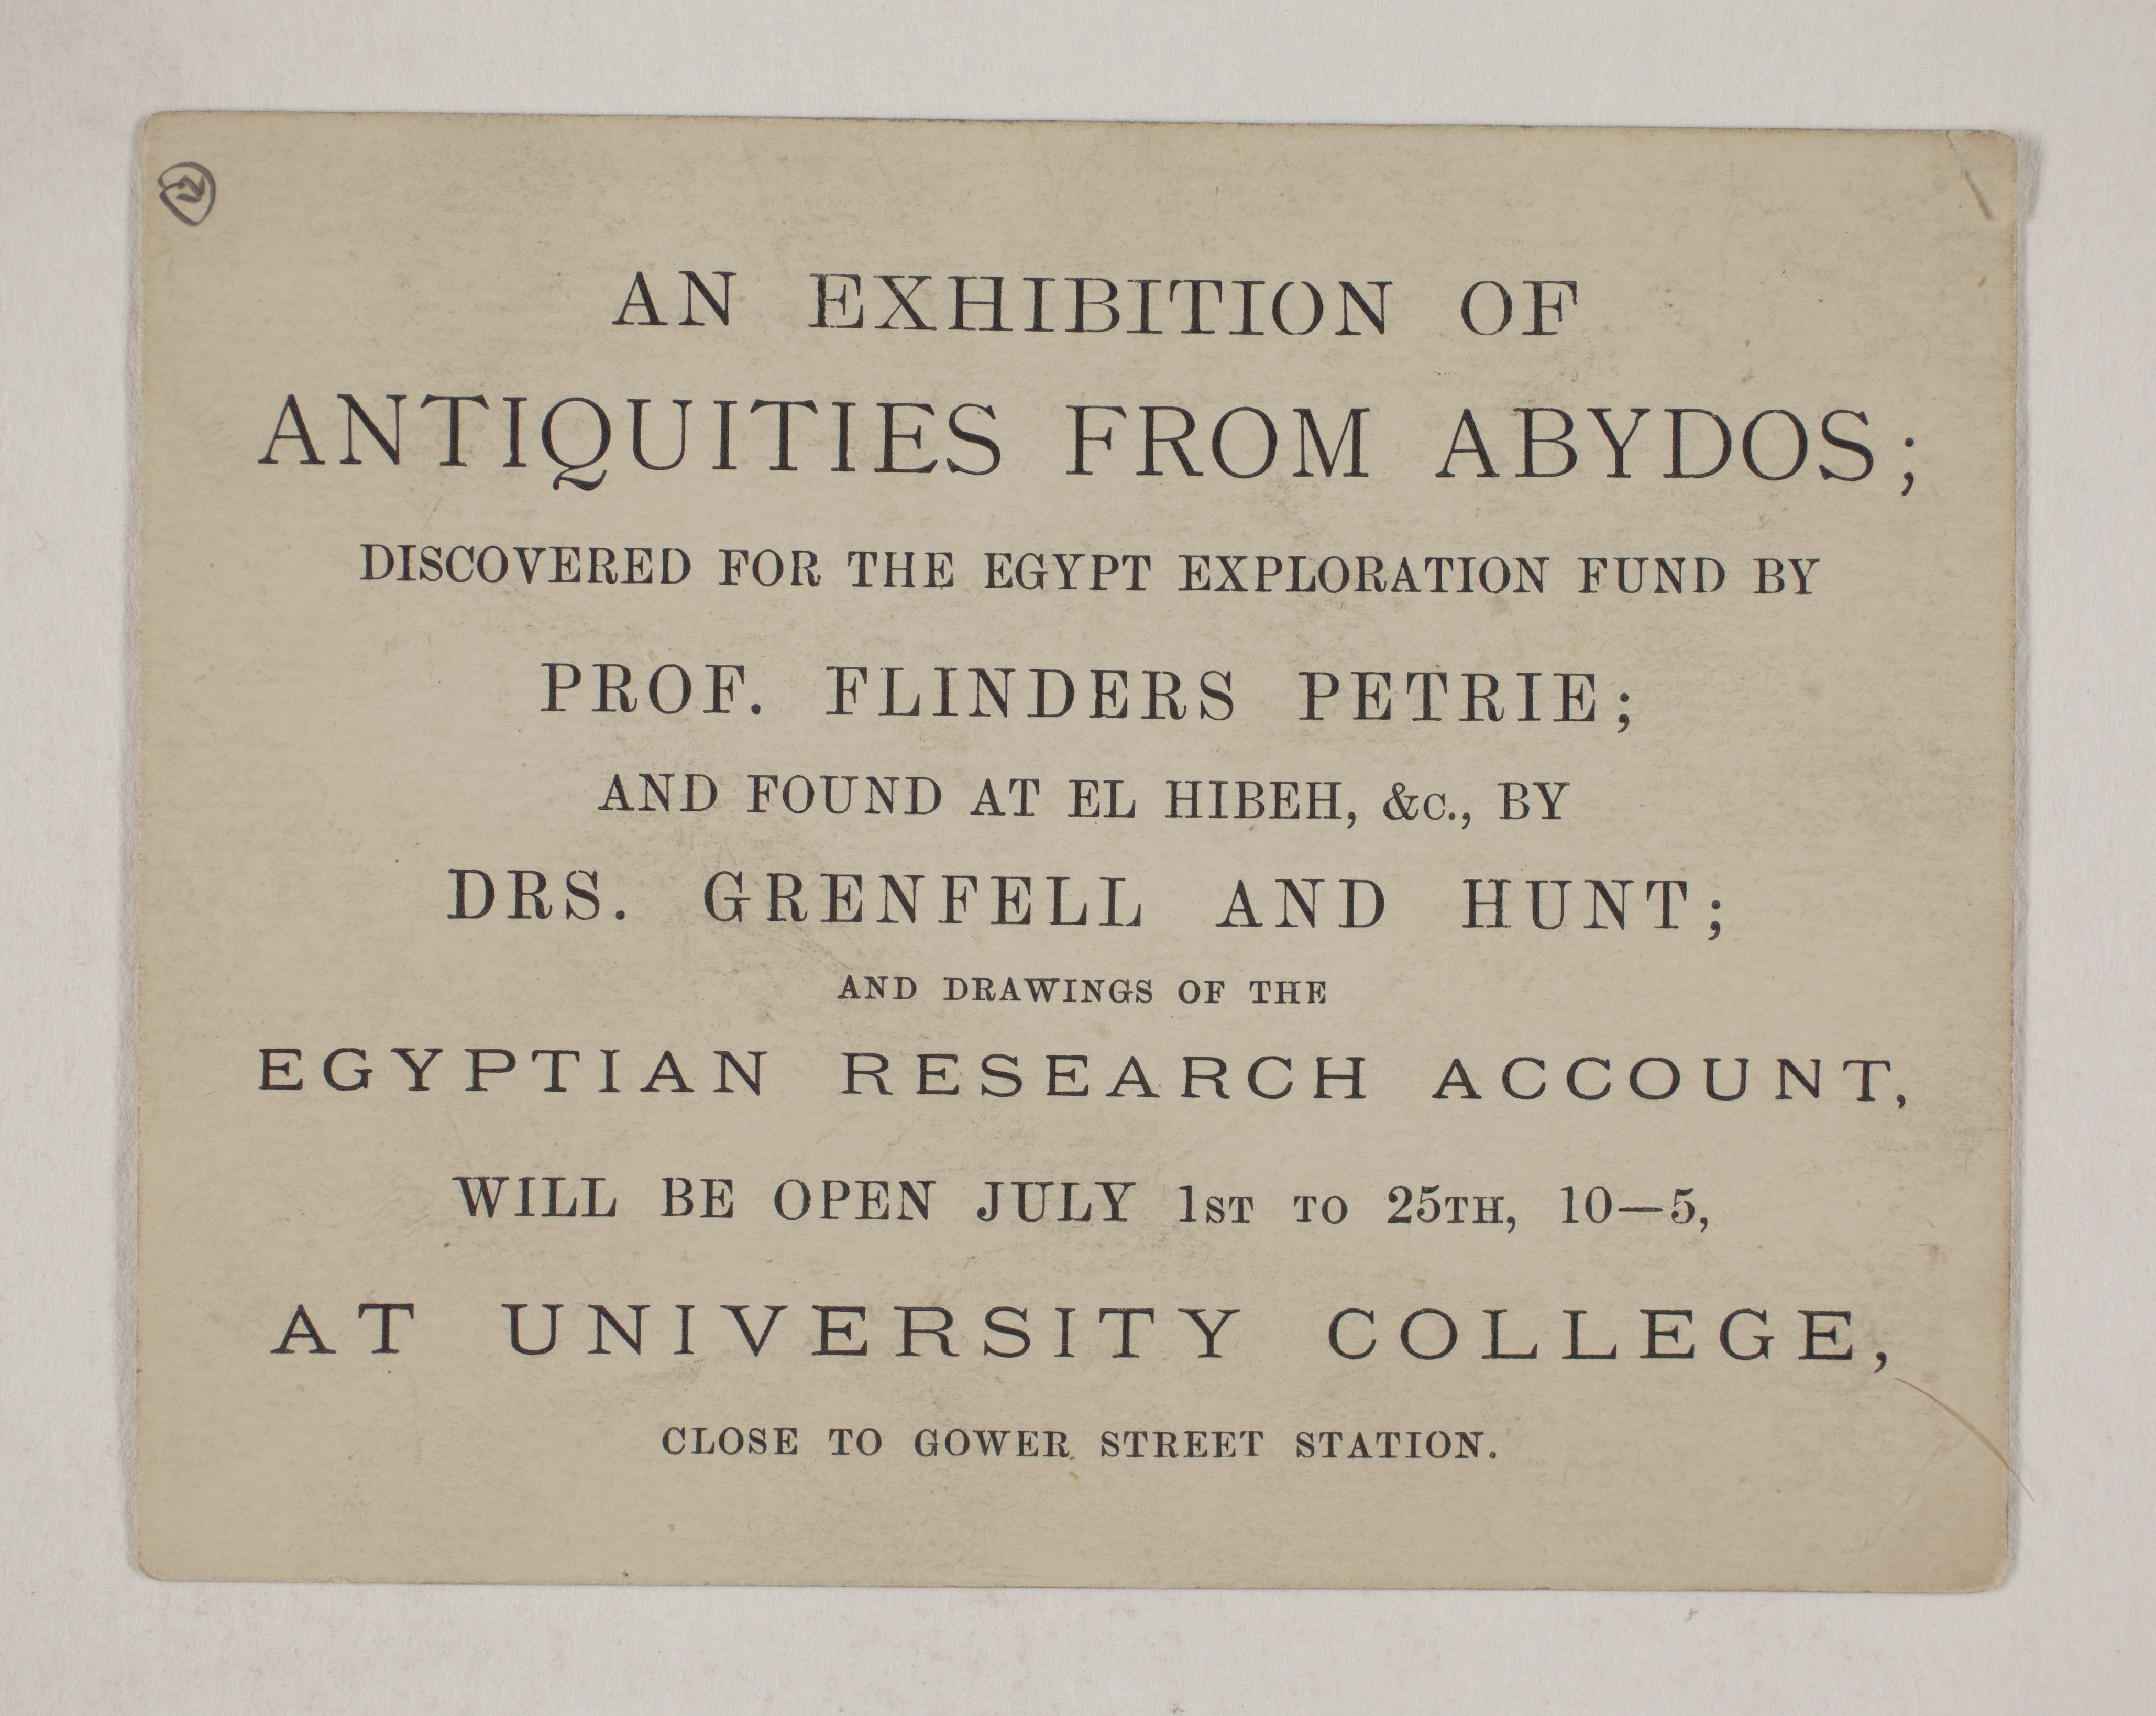 1902-03 Abydos Other PMA/WFP1/D/11/12.2